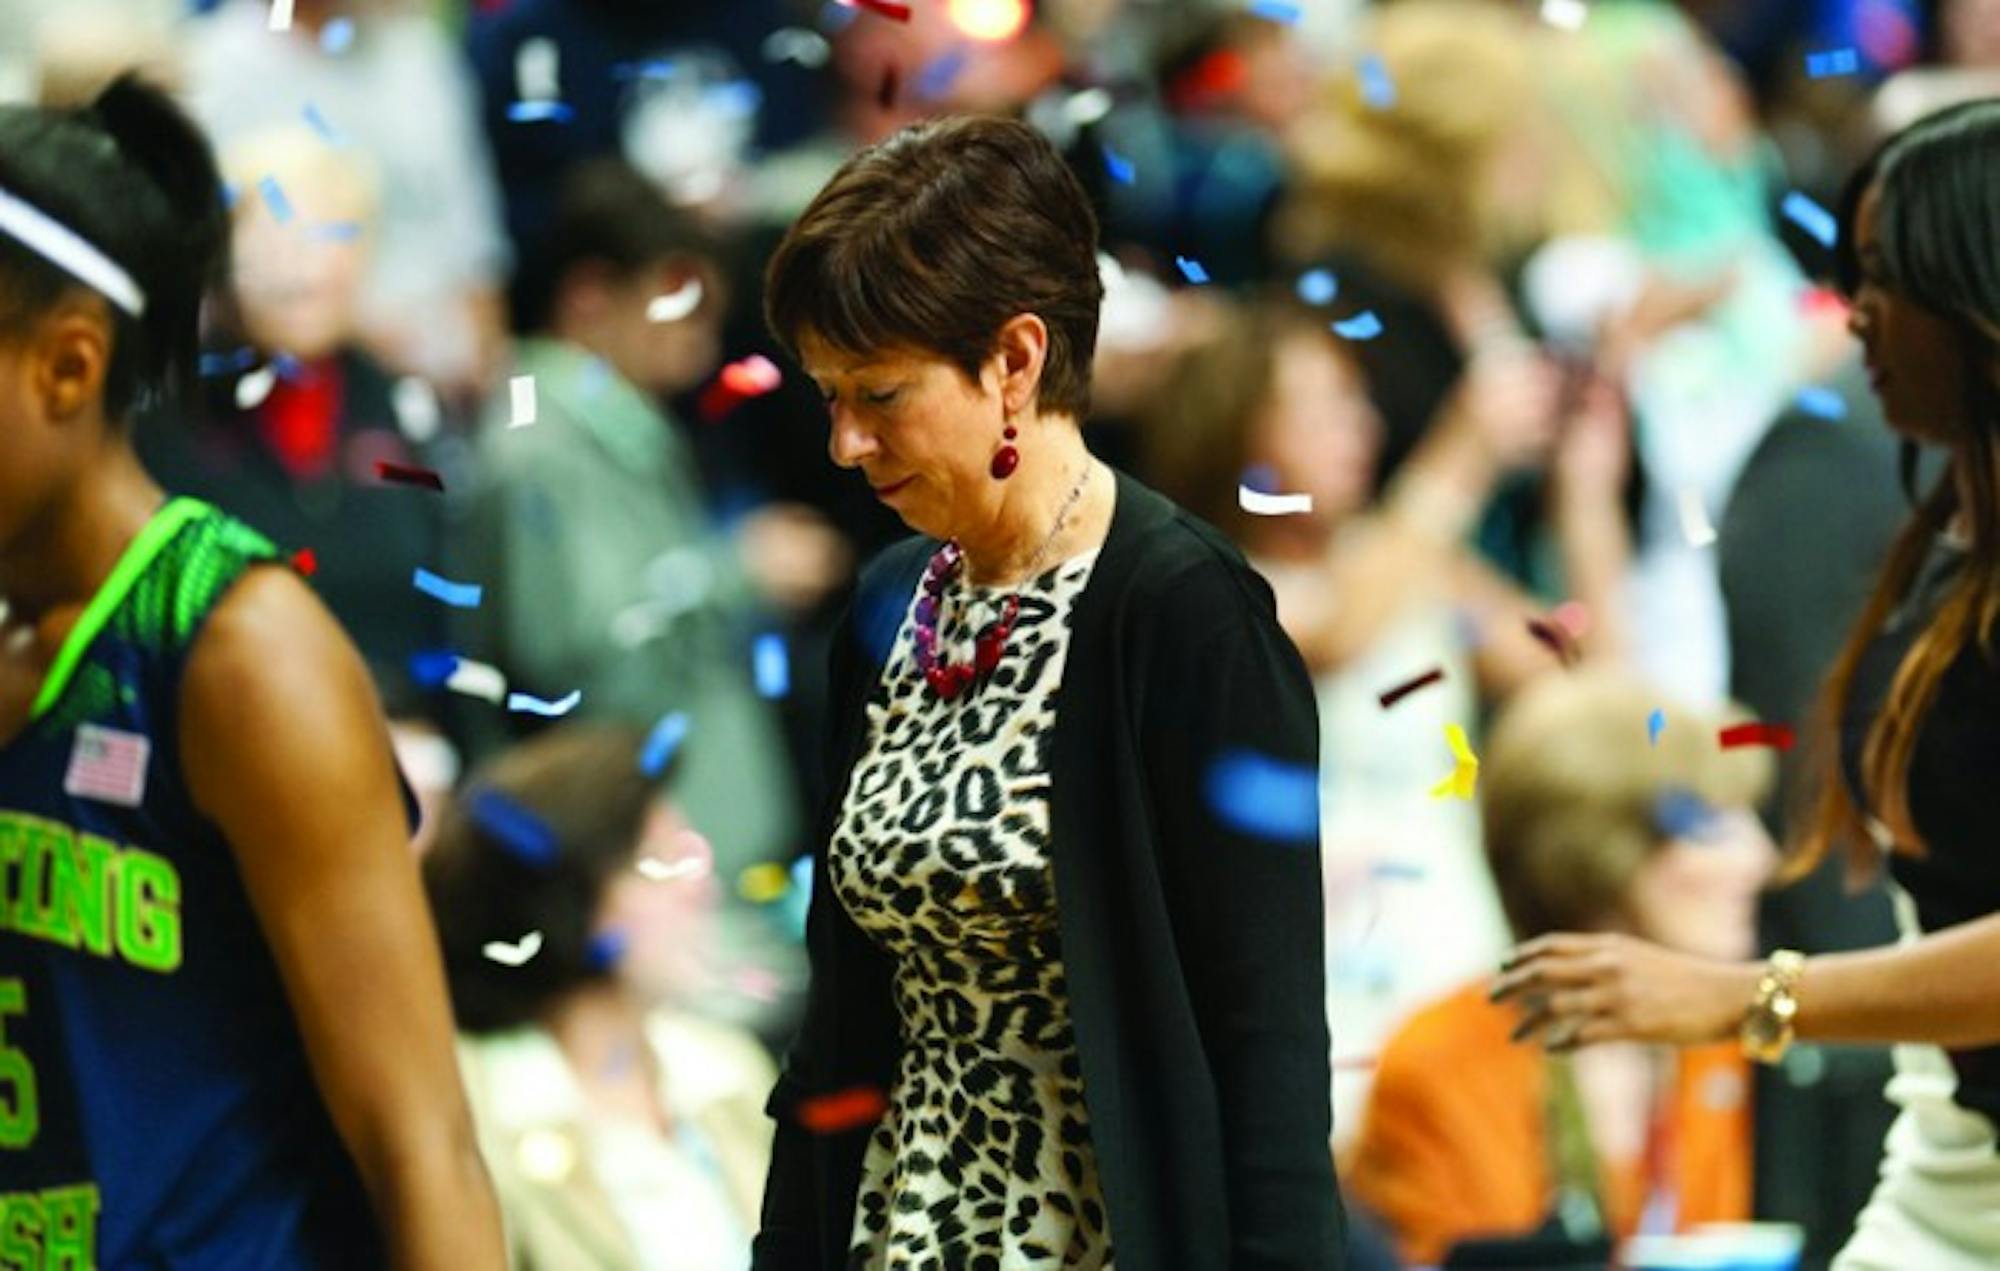 Irish coach Muffet McGraw exits the court under a shower of confetti after Notre Dame’s 79-58 loss to Connecticut in the national championship game Tuesday at Bridgestone Arena in Nashville, Tenn. The defeat was Notre Dame’s first of the season after entering the contest with a perfect 37-0 mark and brings the team’s record in the Final Four to 5-5.